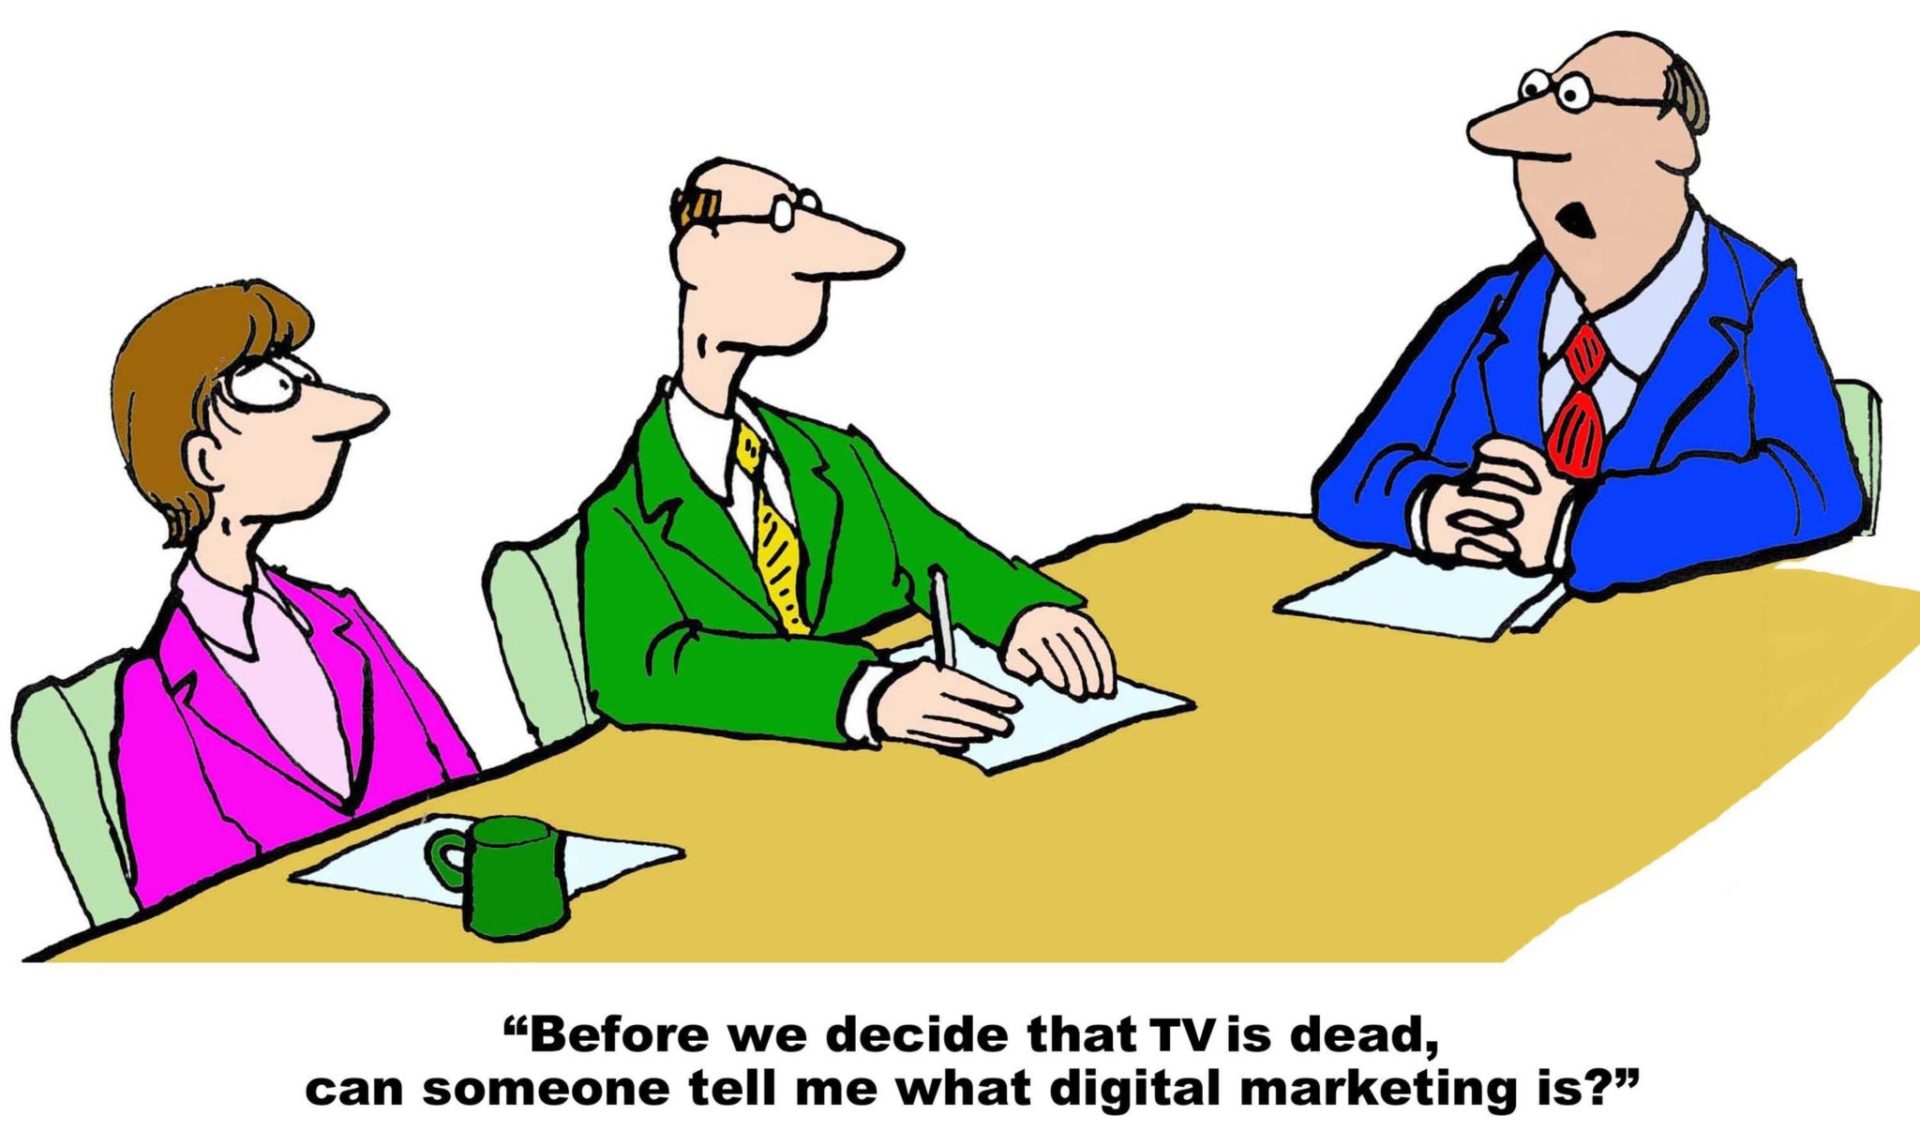 Cartoon of people in a boardroom, boss says, "Before we decide that TV is dead, can someone tell me what digital marketing is?"